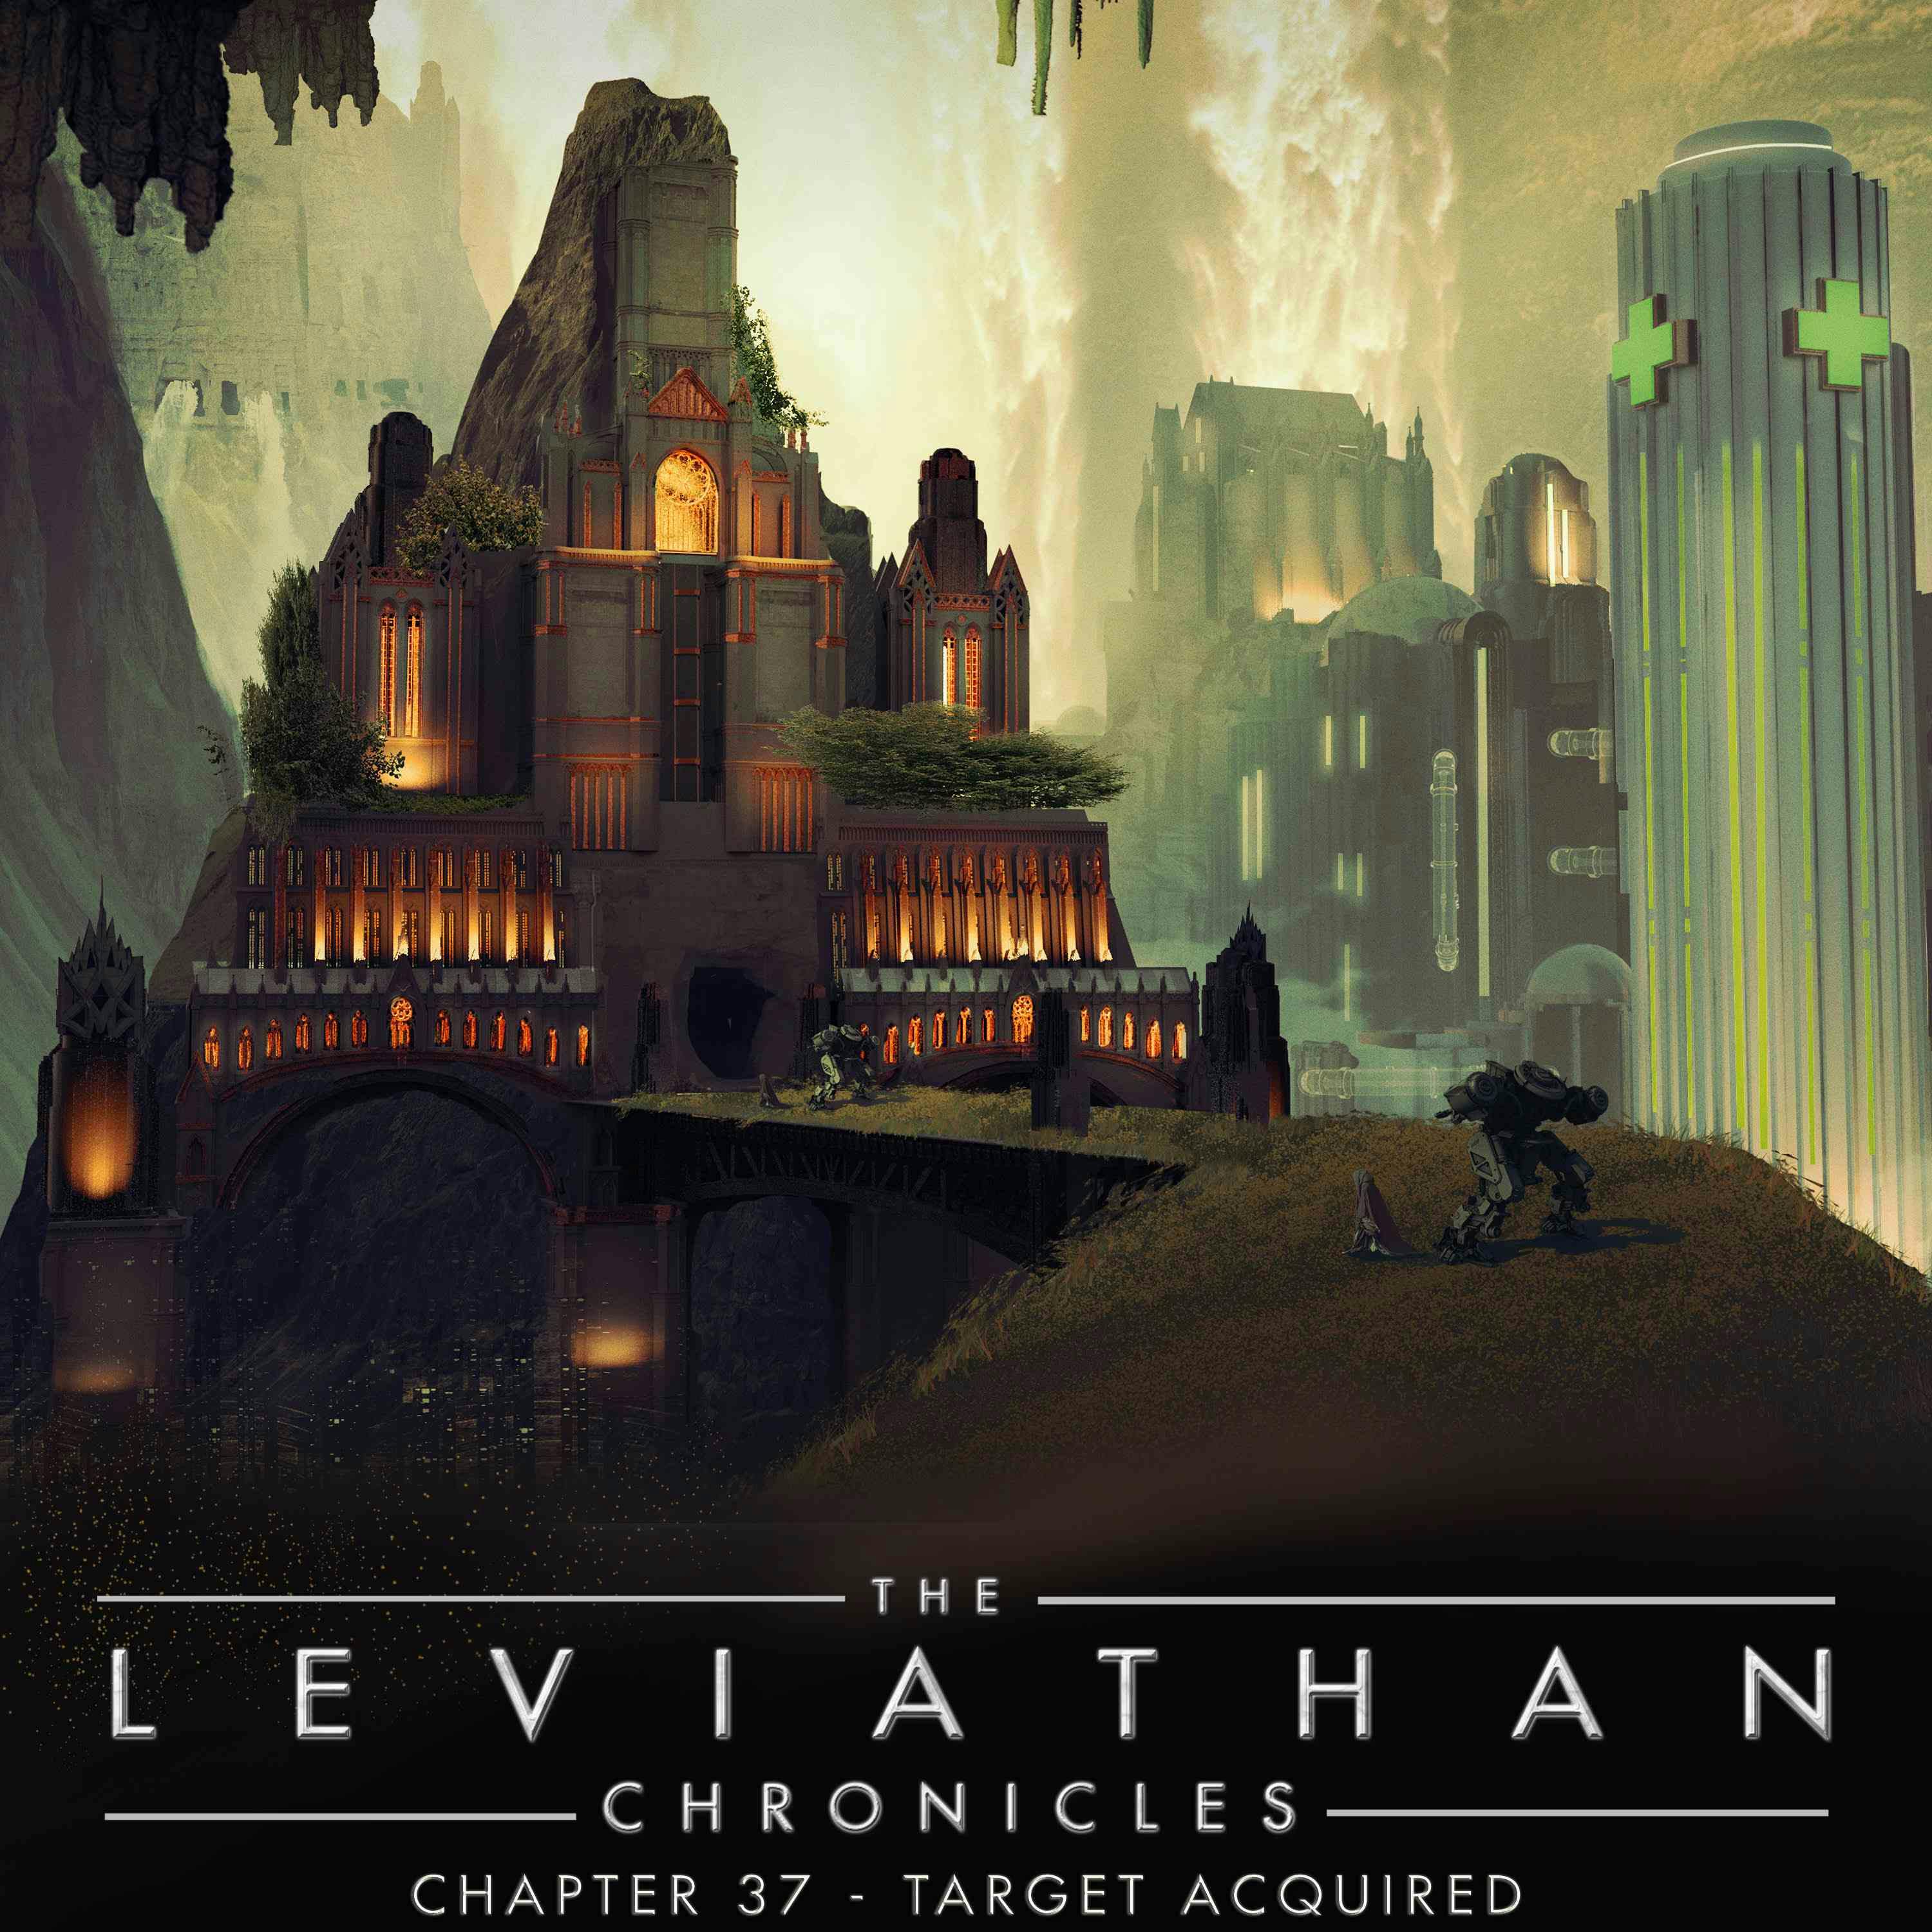 The Leviathan Chronicles | Chapter 37 - Target Acquired